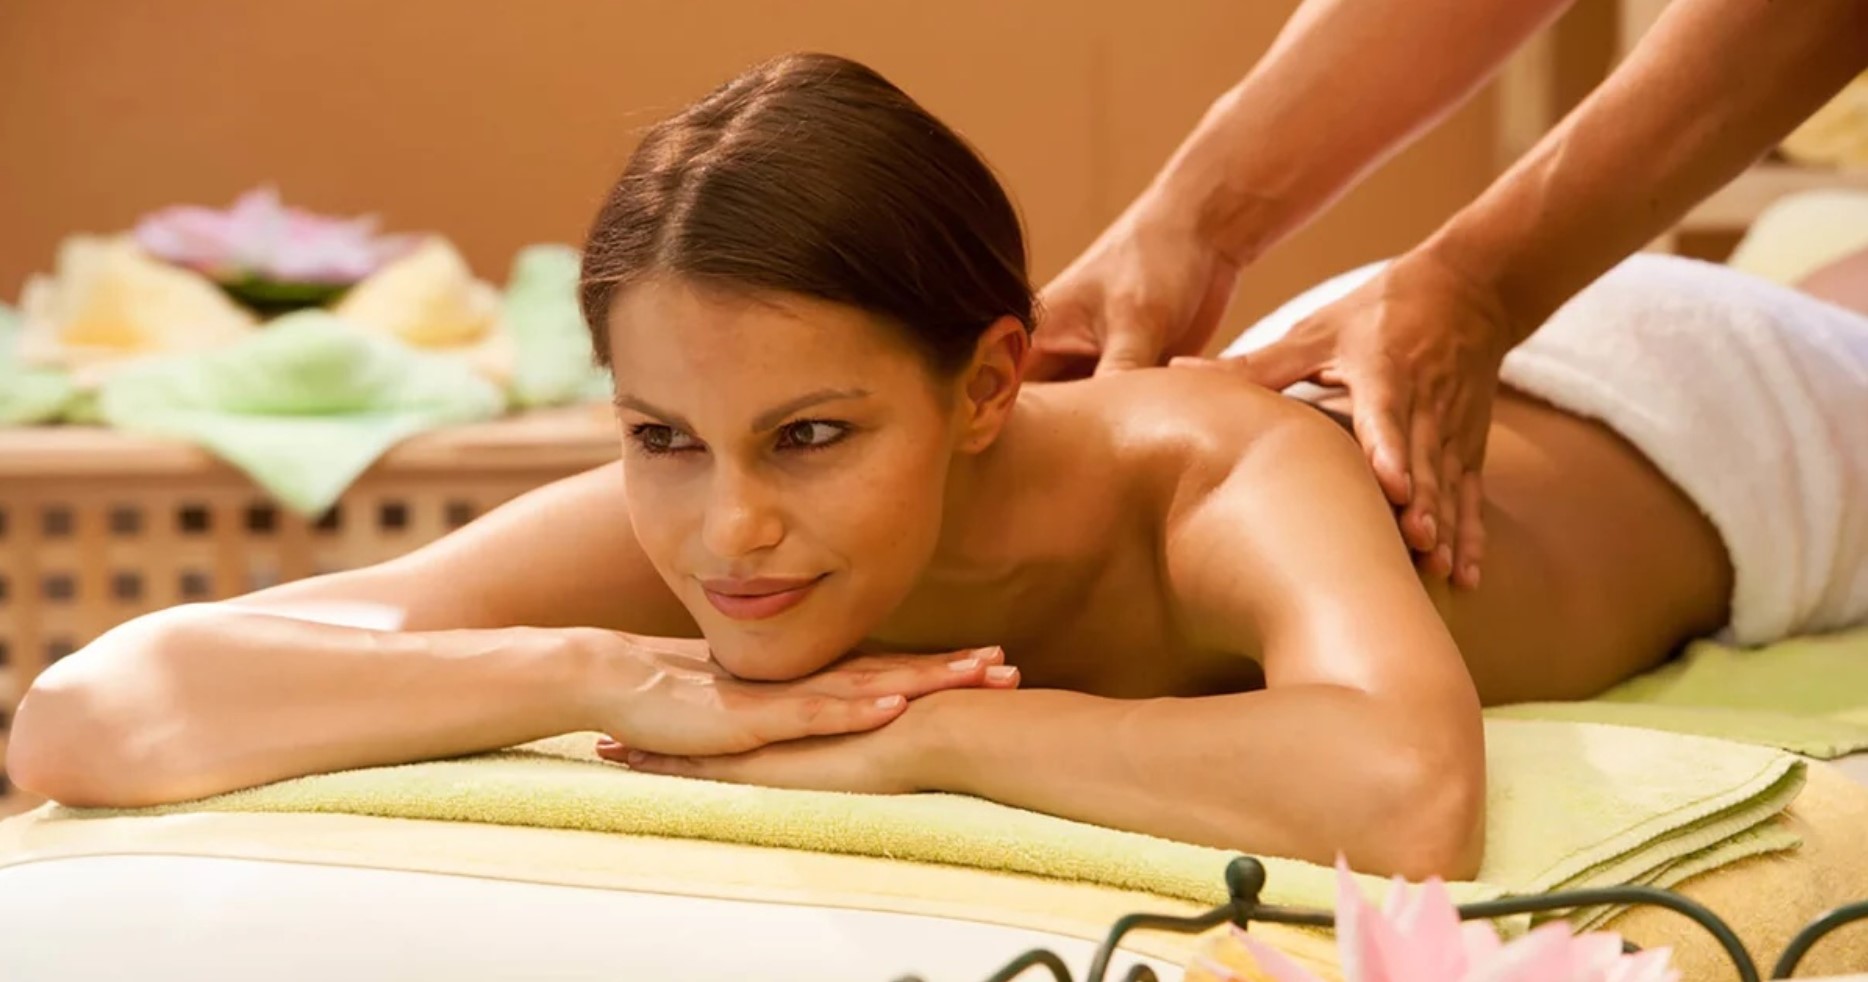 The Evolution of Happy Ending Massage: From Taboo to Mainstream